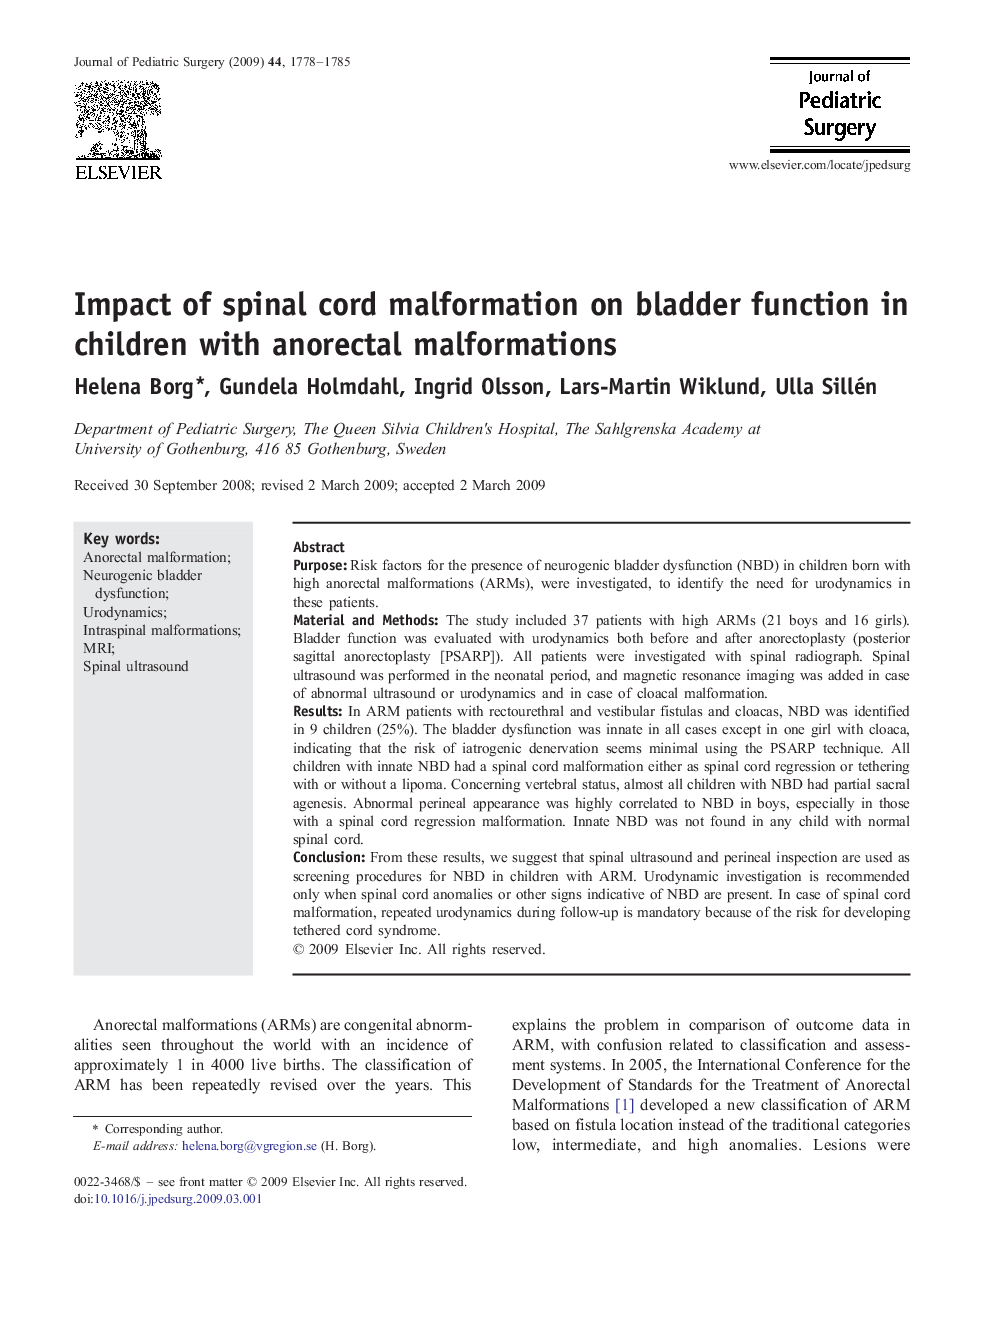 Impact of spinal cord malformation on bladder function in children with anorectal malformations